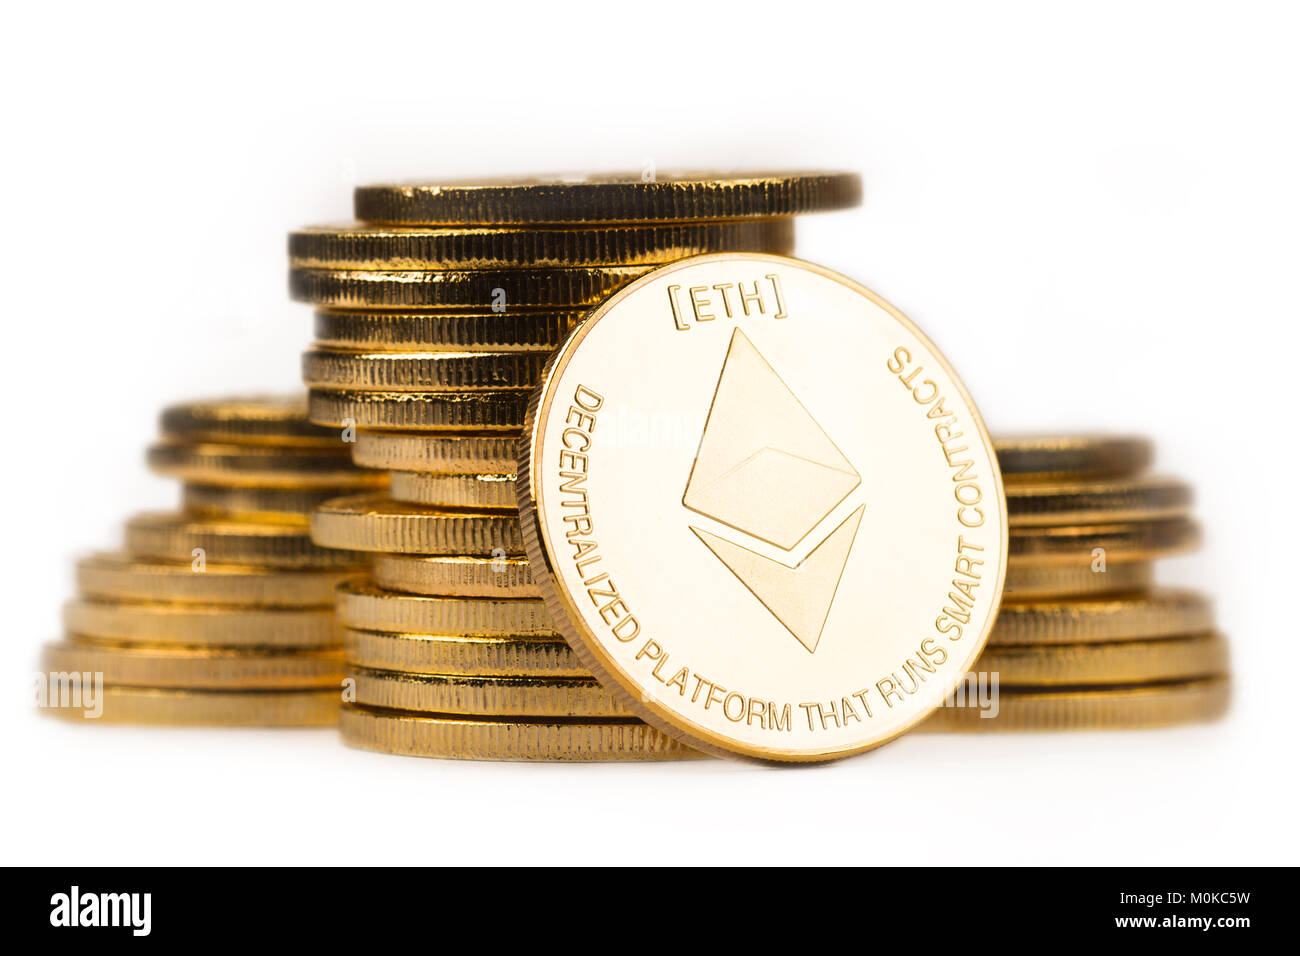 close up golden ethereum in front of a pile of golden metallic coins isolated on white background Stock Photo